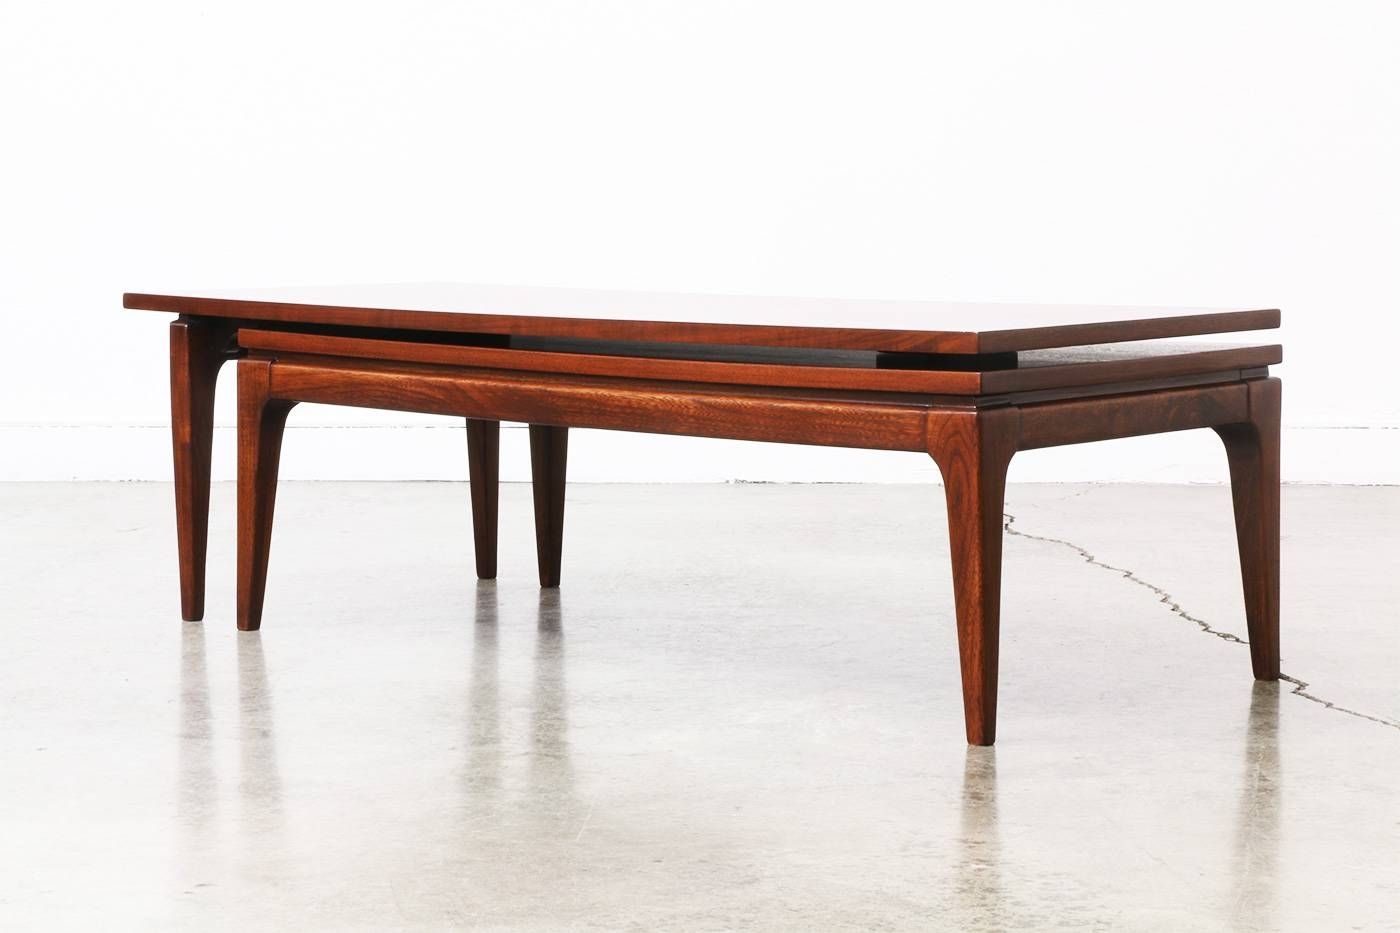 Stunning L Shaped Coffee Table With Mid Century Walnut Quotlquot Inside L Shaped Coffee Tables (View 12 of 30)